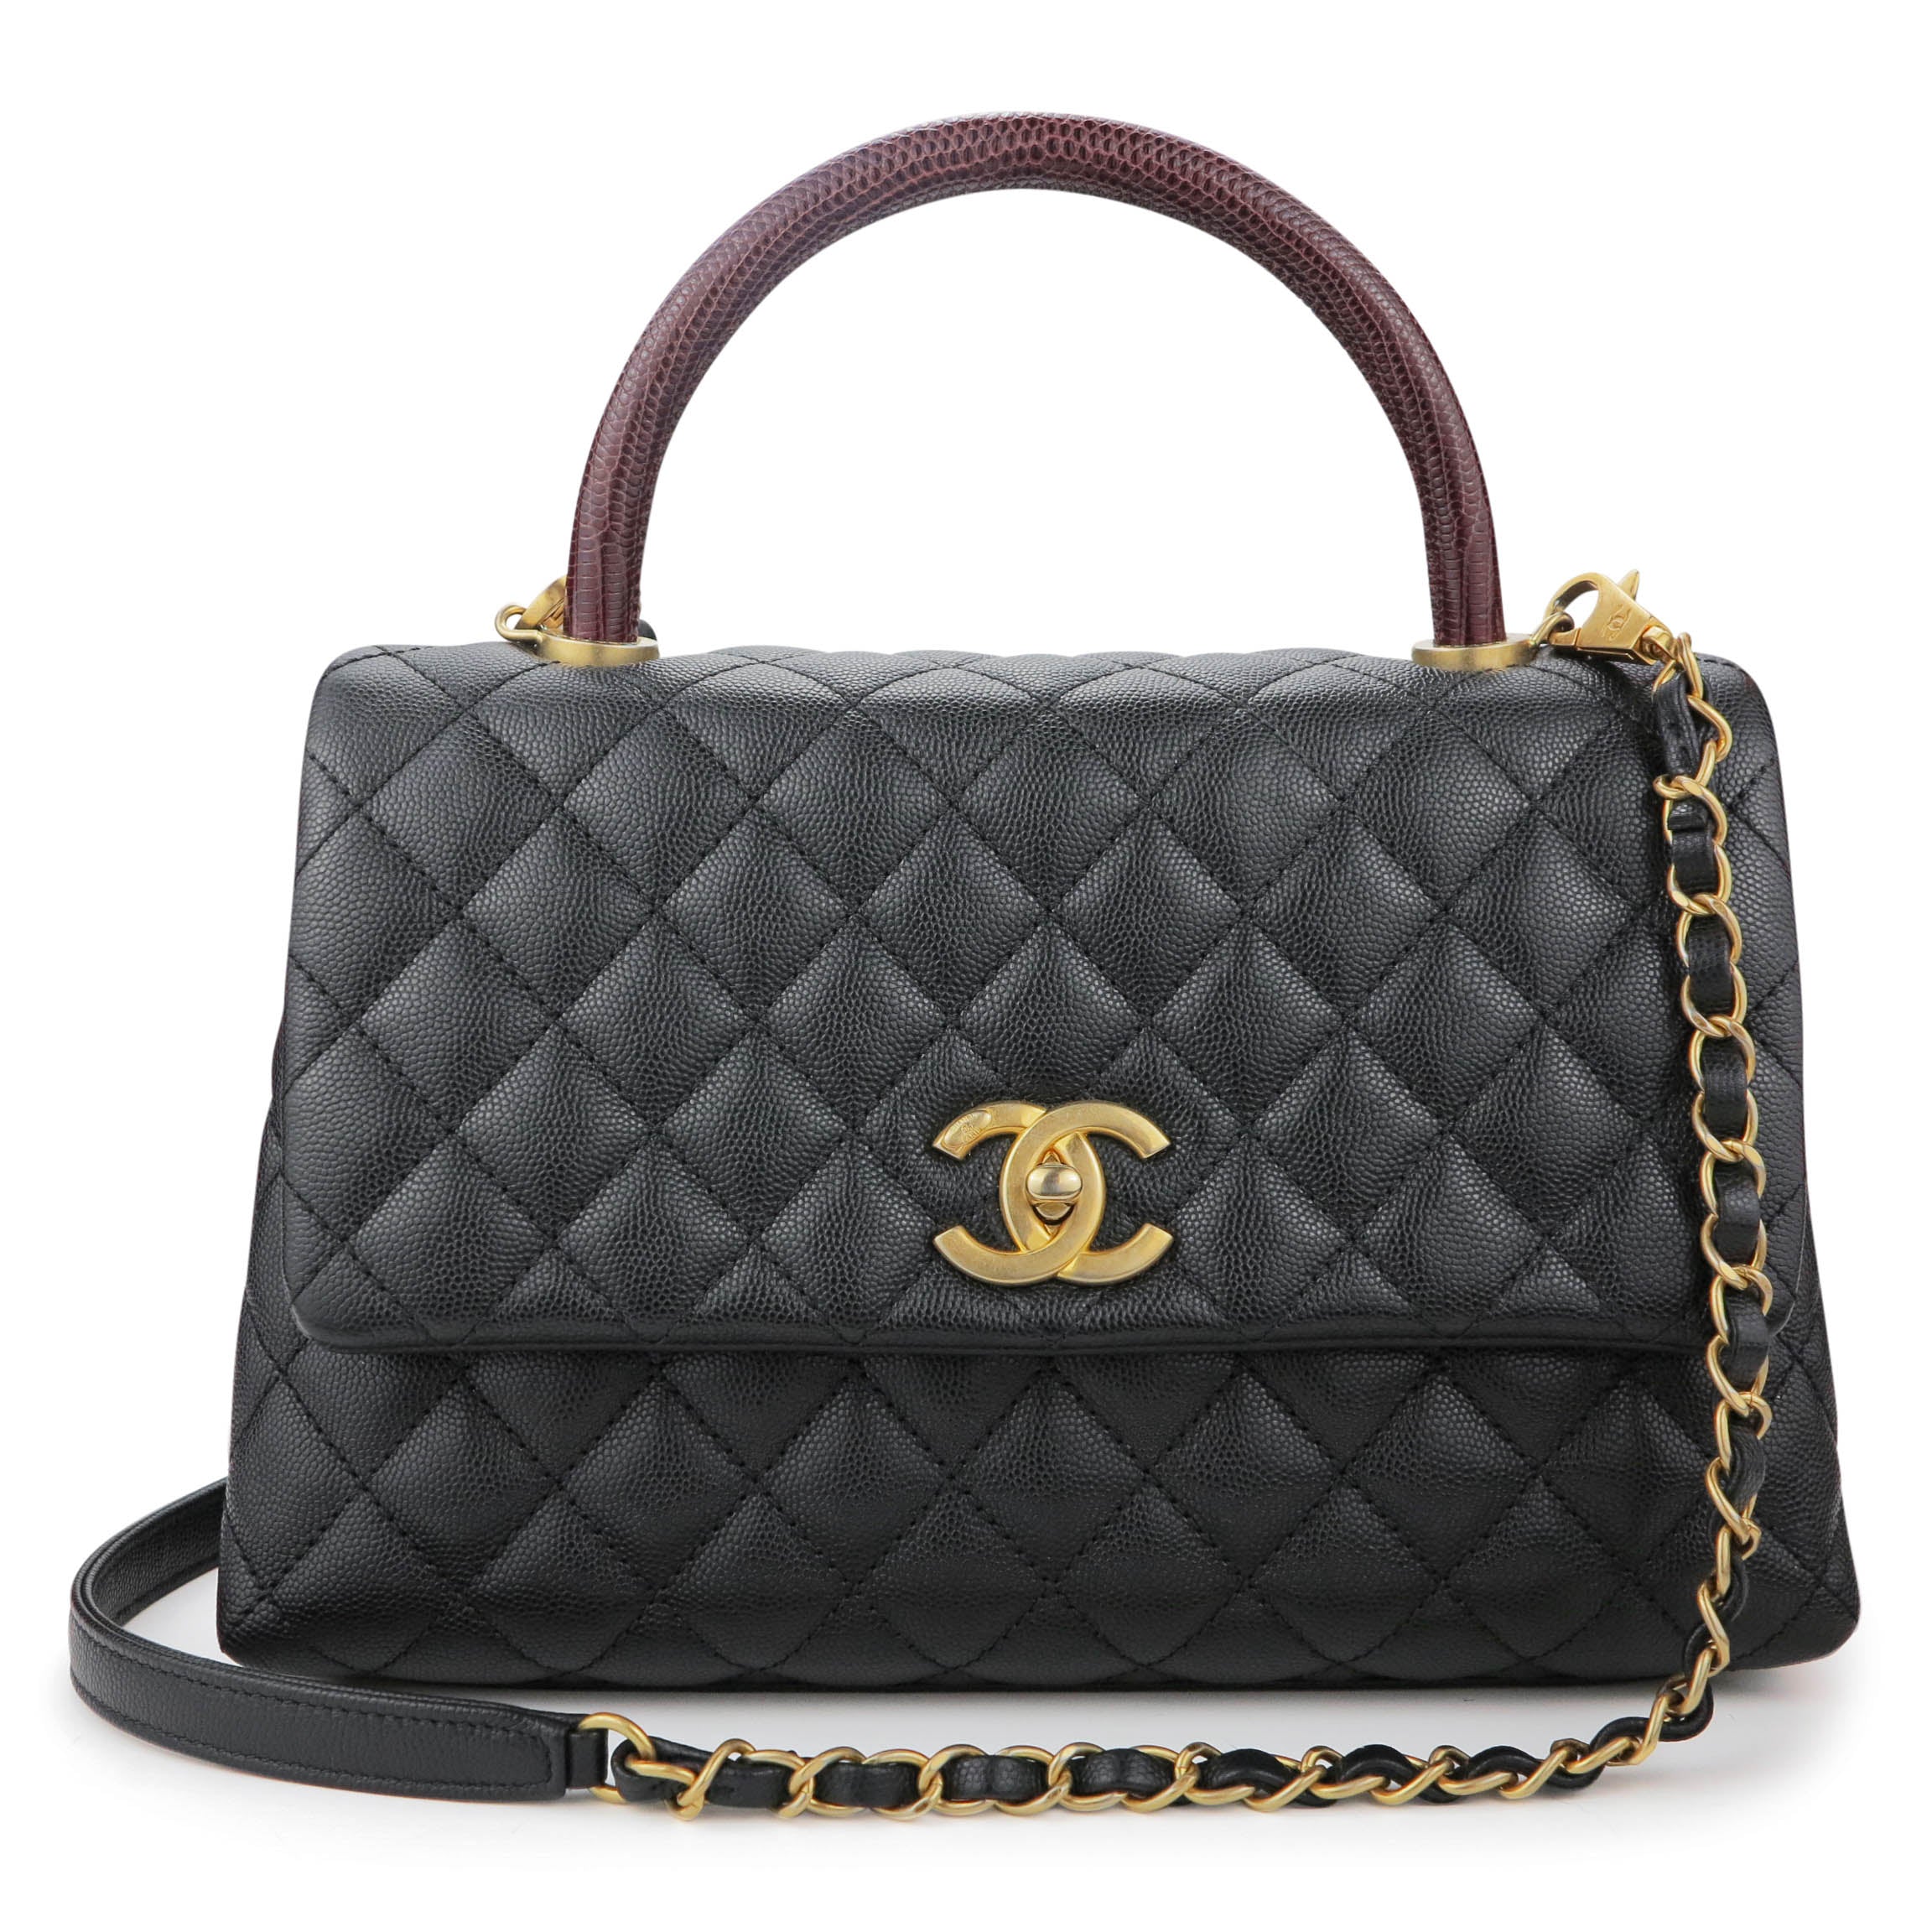 Affordable chanel coco handle For Sale, Women's Fashion